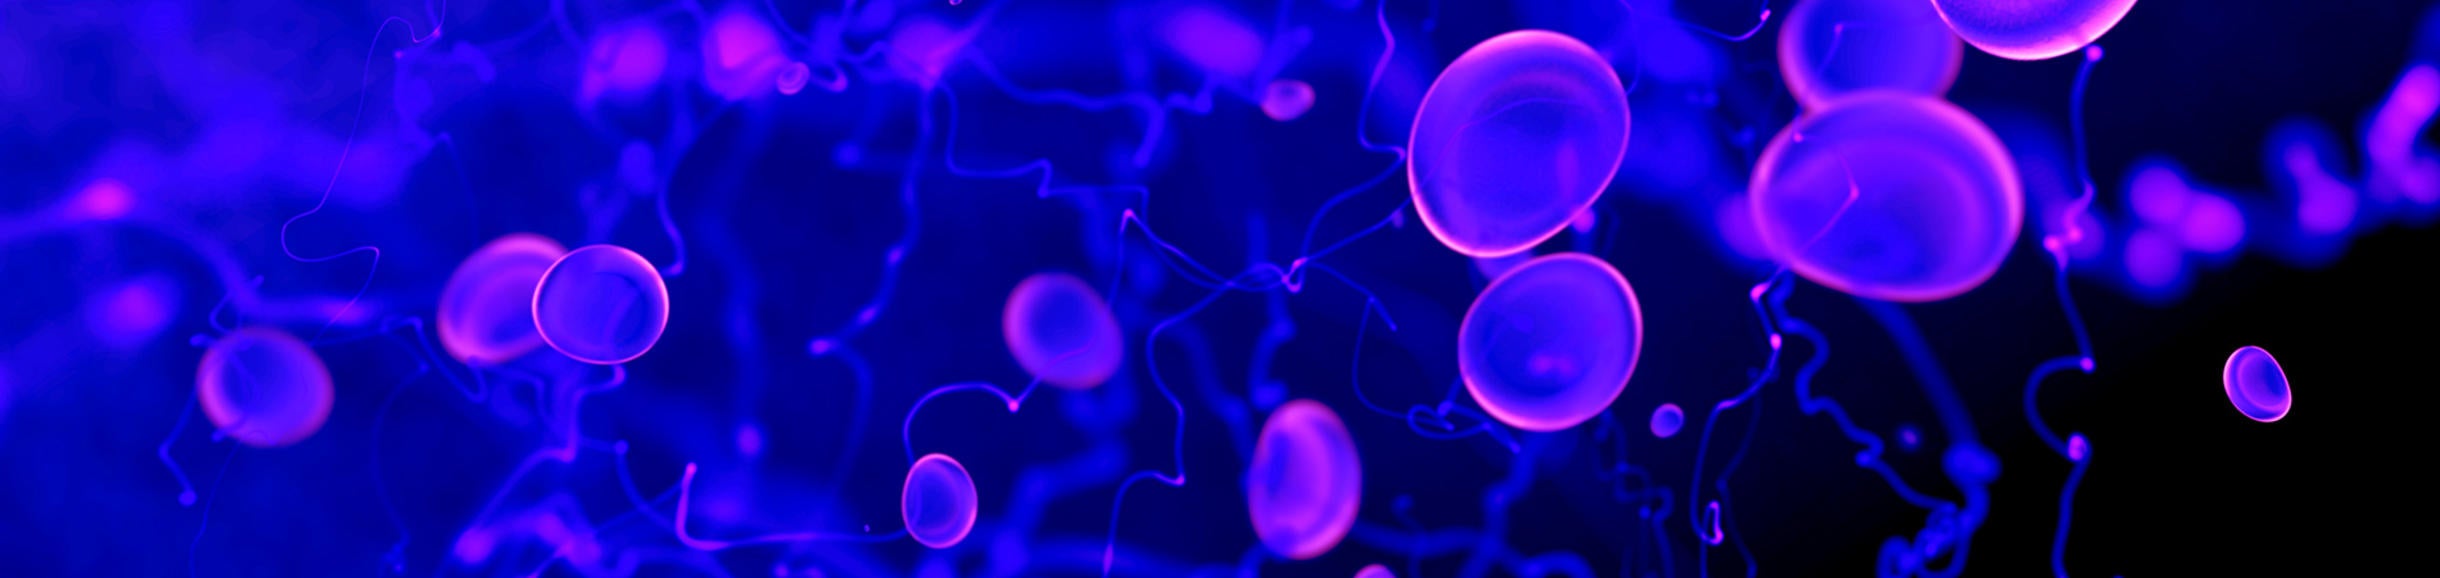 iStock Blue Glowing Cells